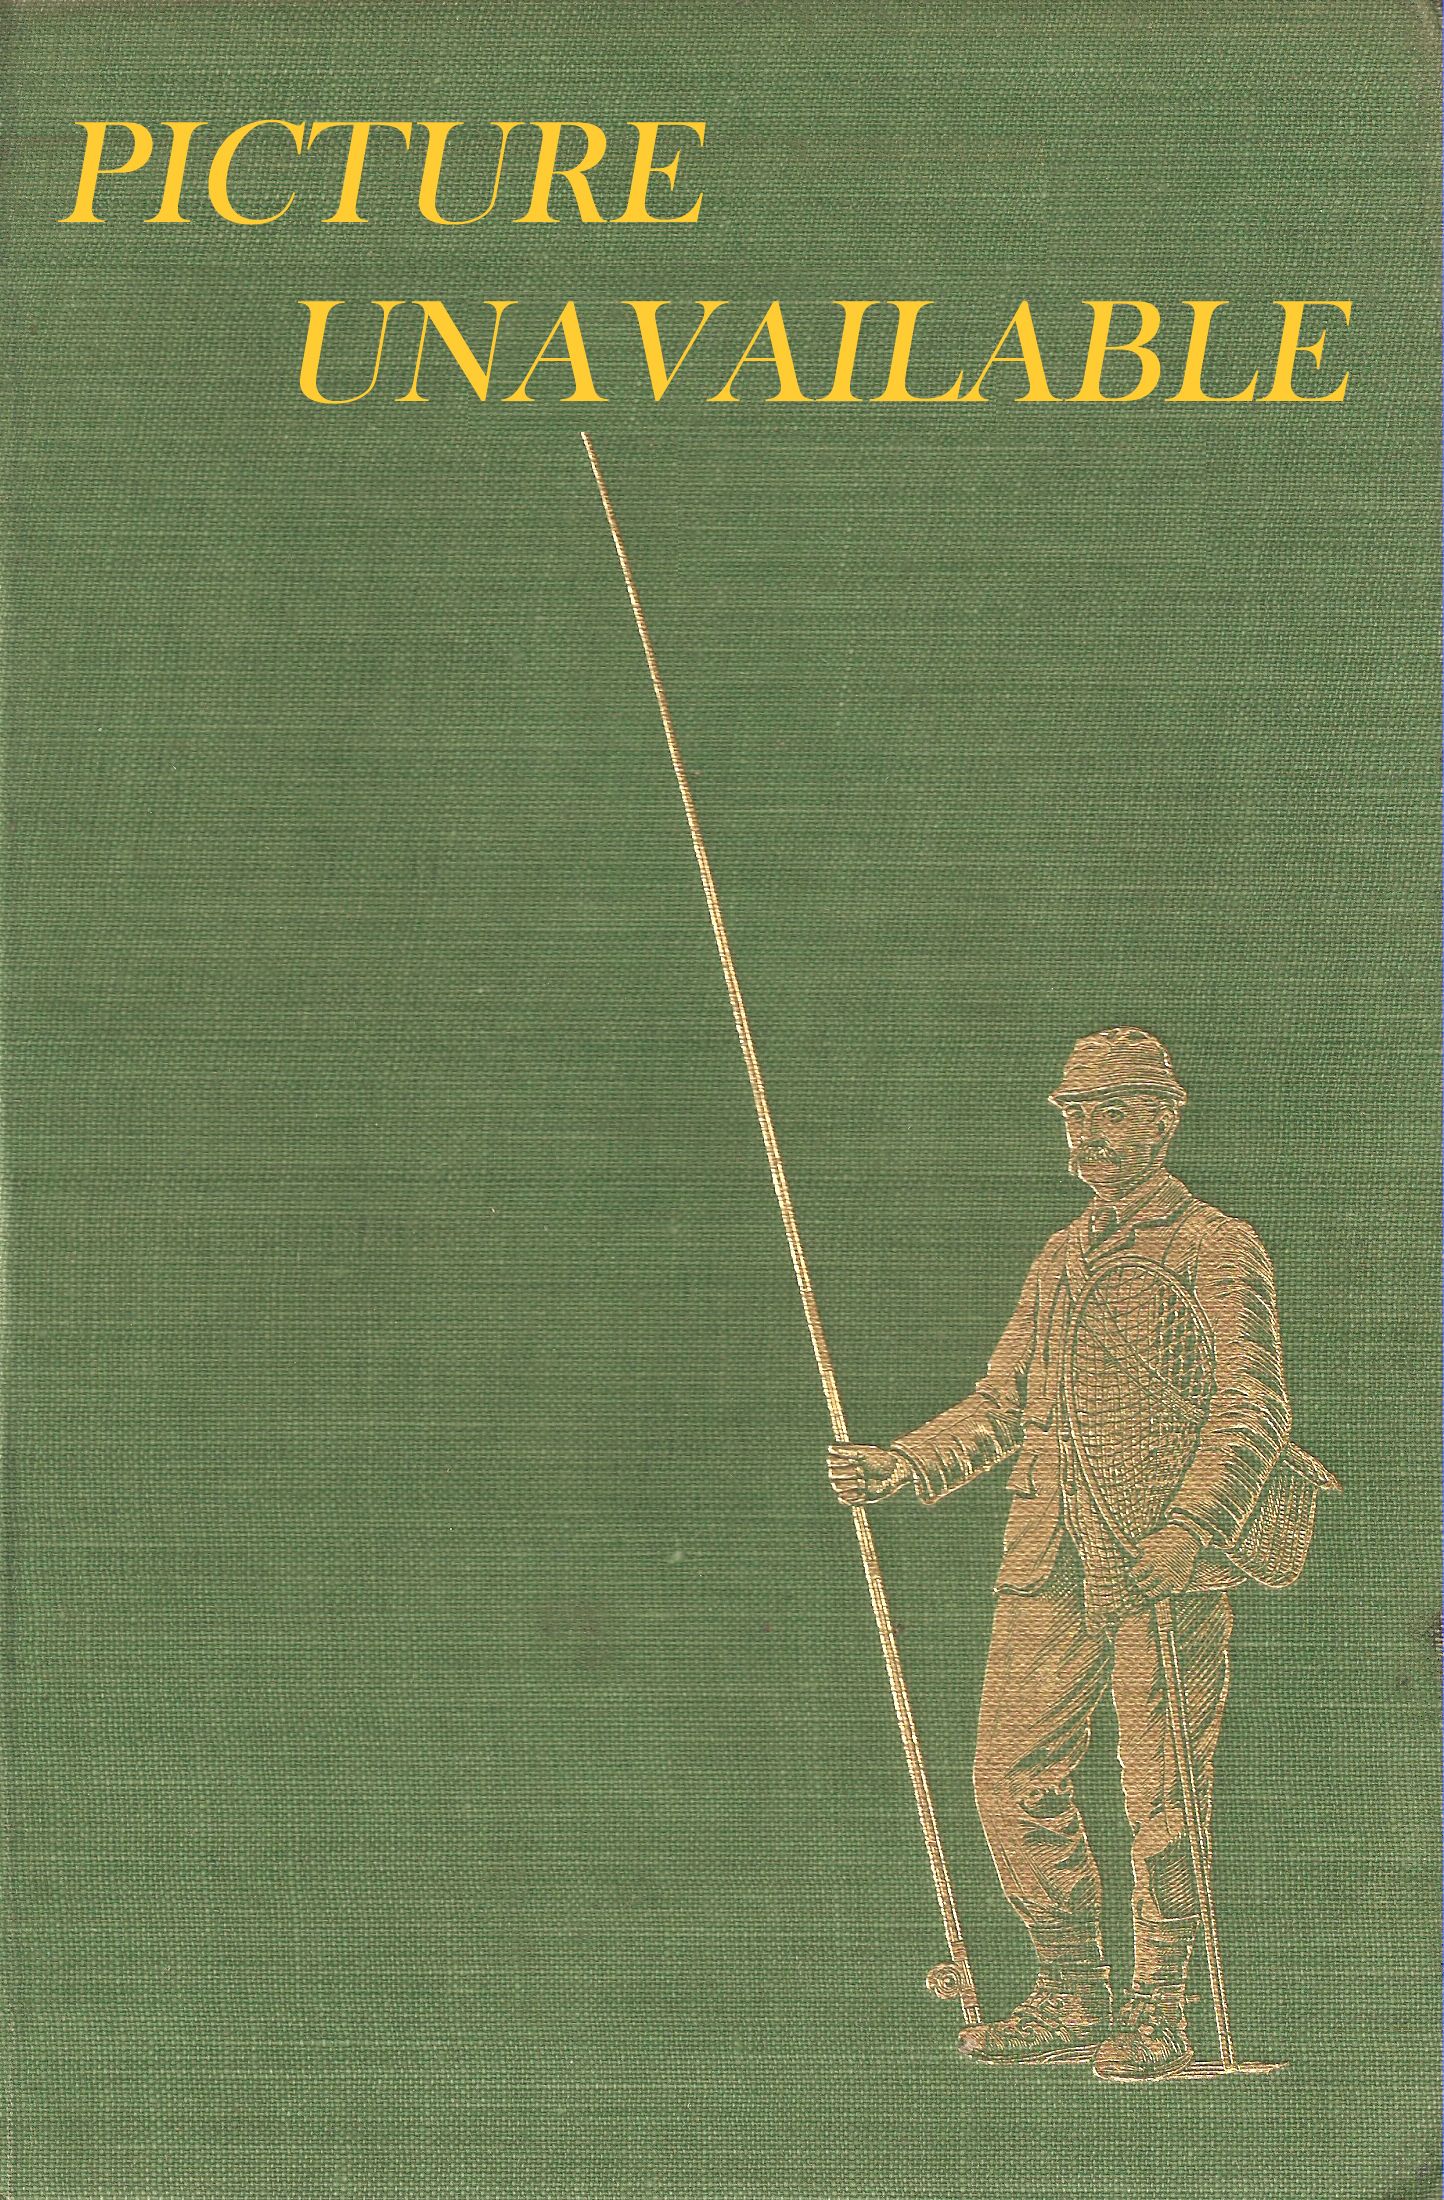 ERNEST CROSFIELD: HIS SALMON FLIES AND FISHING. Compiled and edited by  Colin Innes. Angling Monographs Series Volume Eight. De luxe edition.